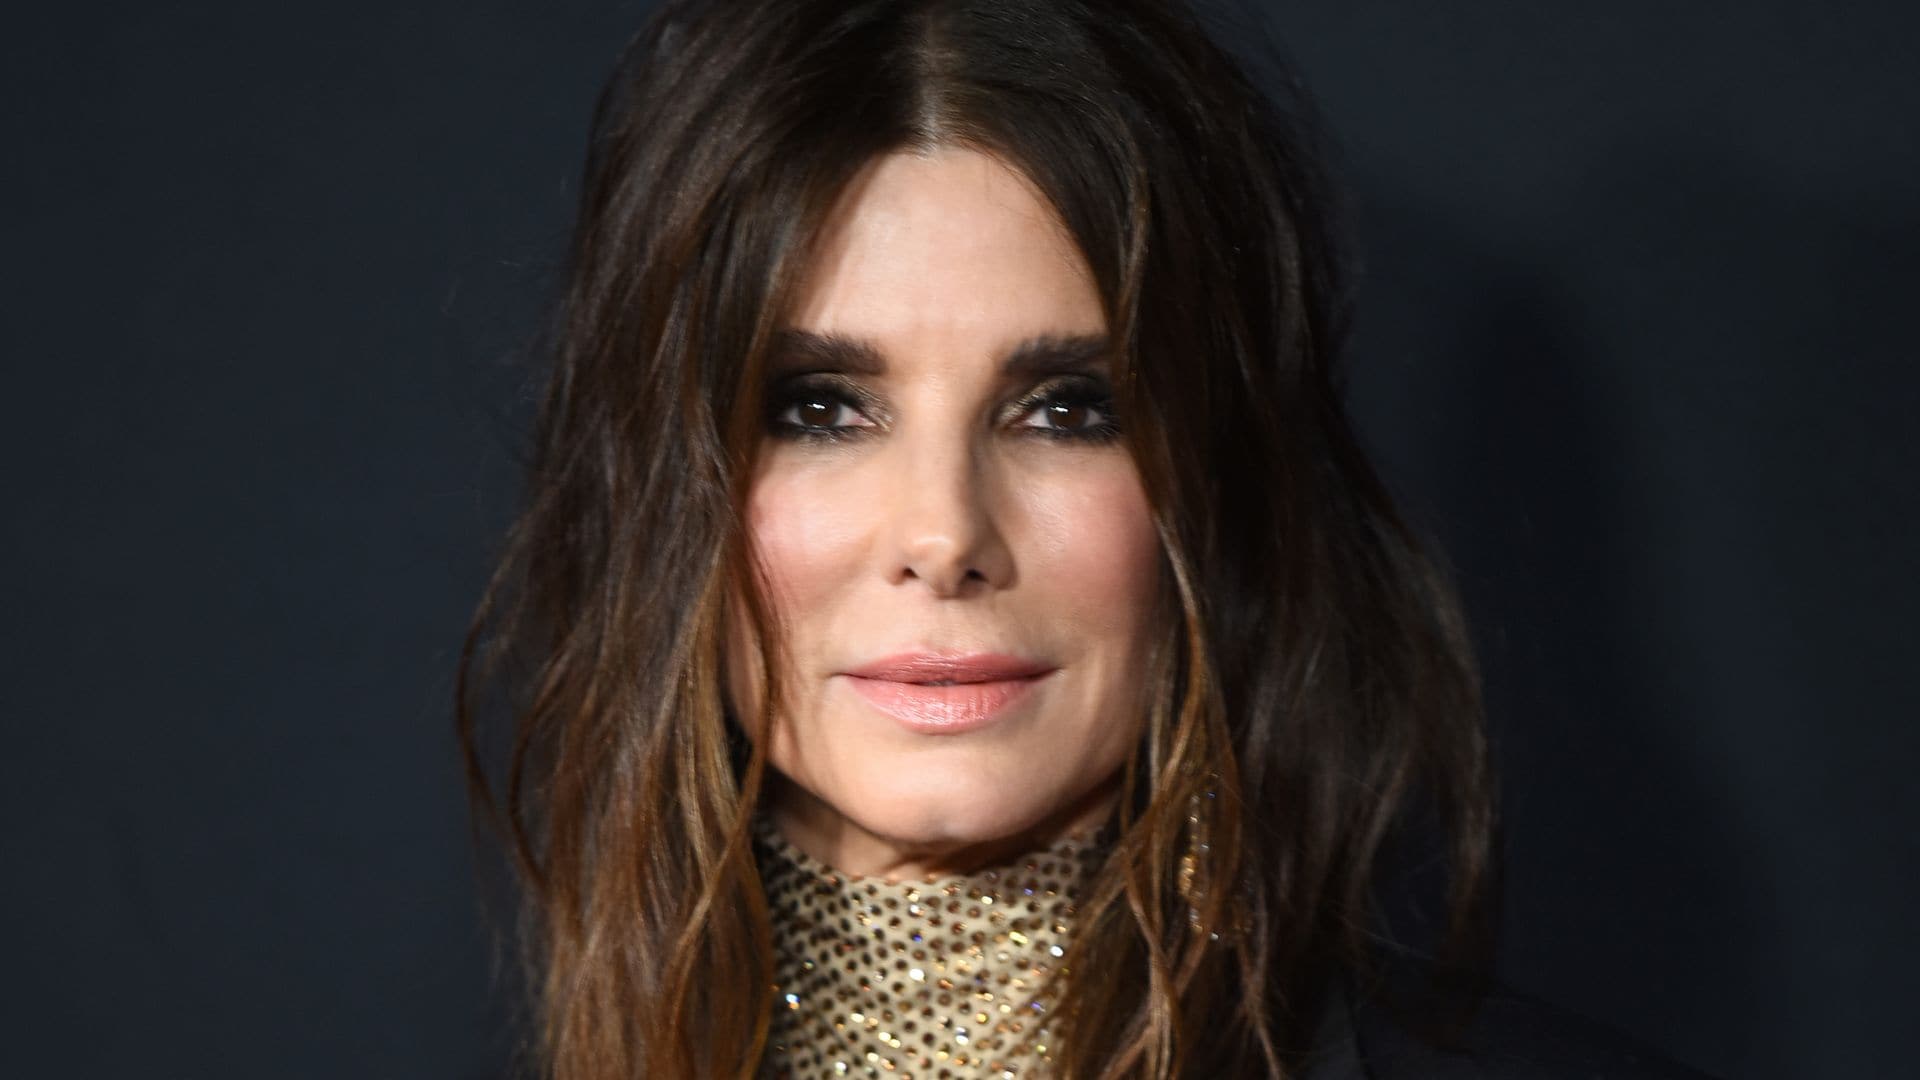 Sandra Bullock is 'ready to get back in the game' after the death of her partner